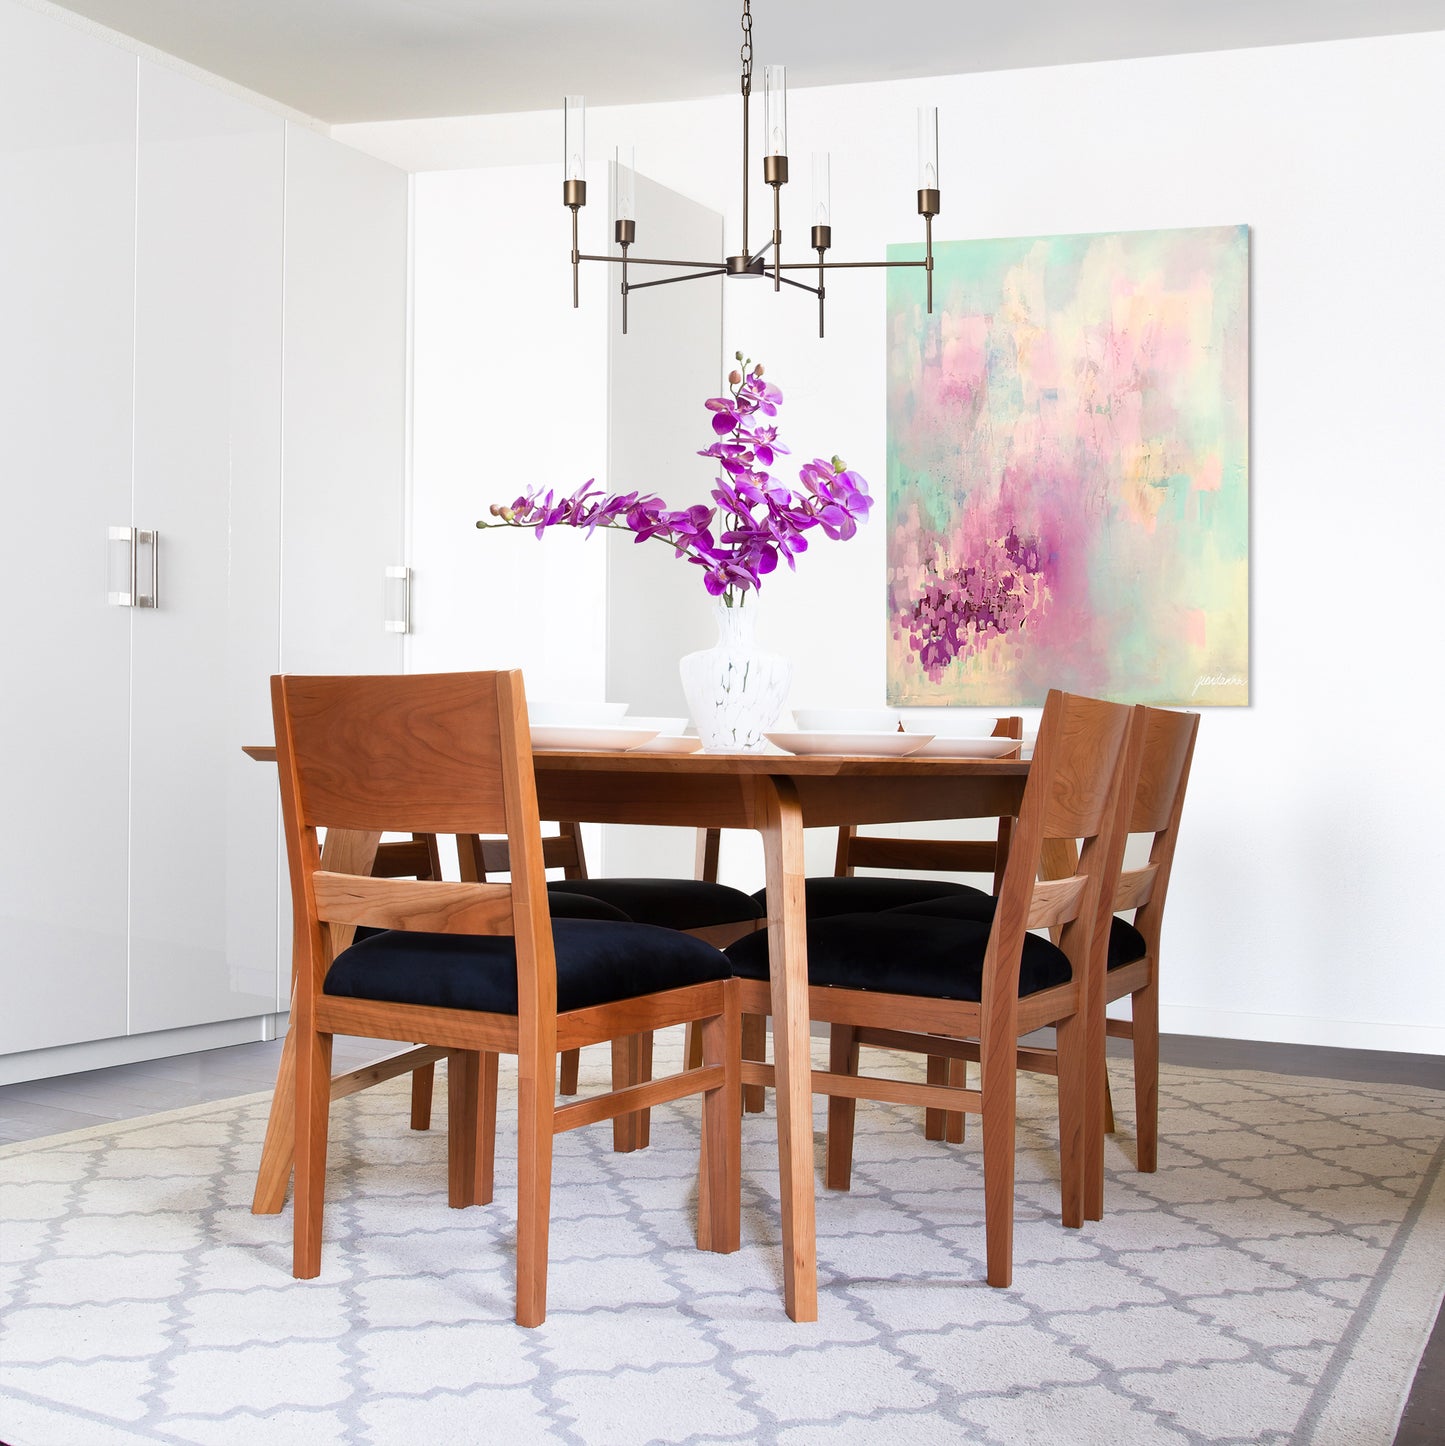 A modern dining room with a Vermont Woods Studios Burke Modern chair, a natural solid wood table set for four, dark cushioned chairs, a contemporary chandelier above, and an abstract painting on the wall.